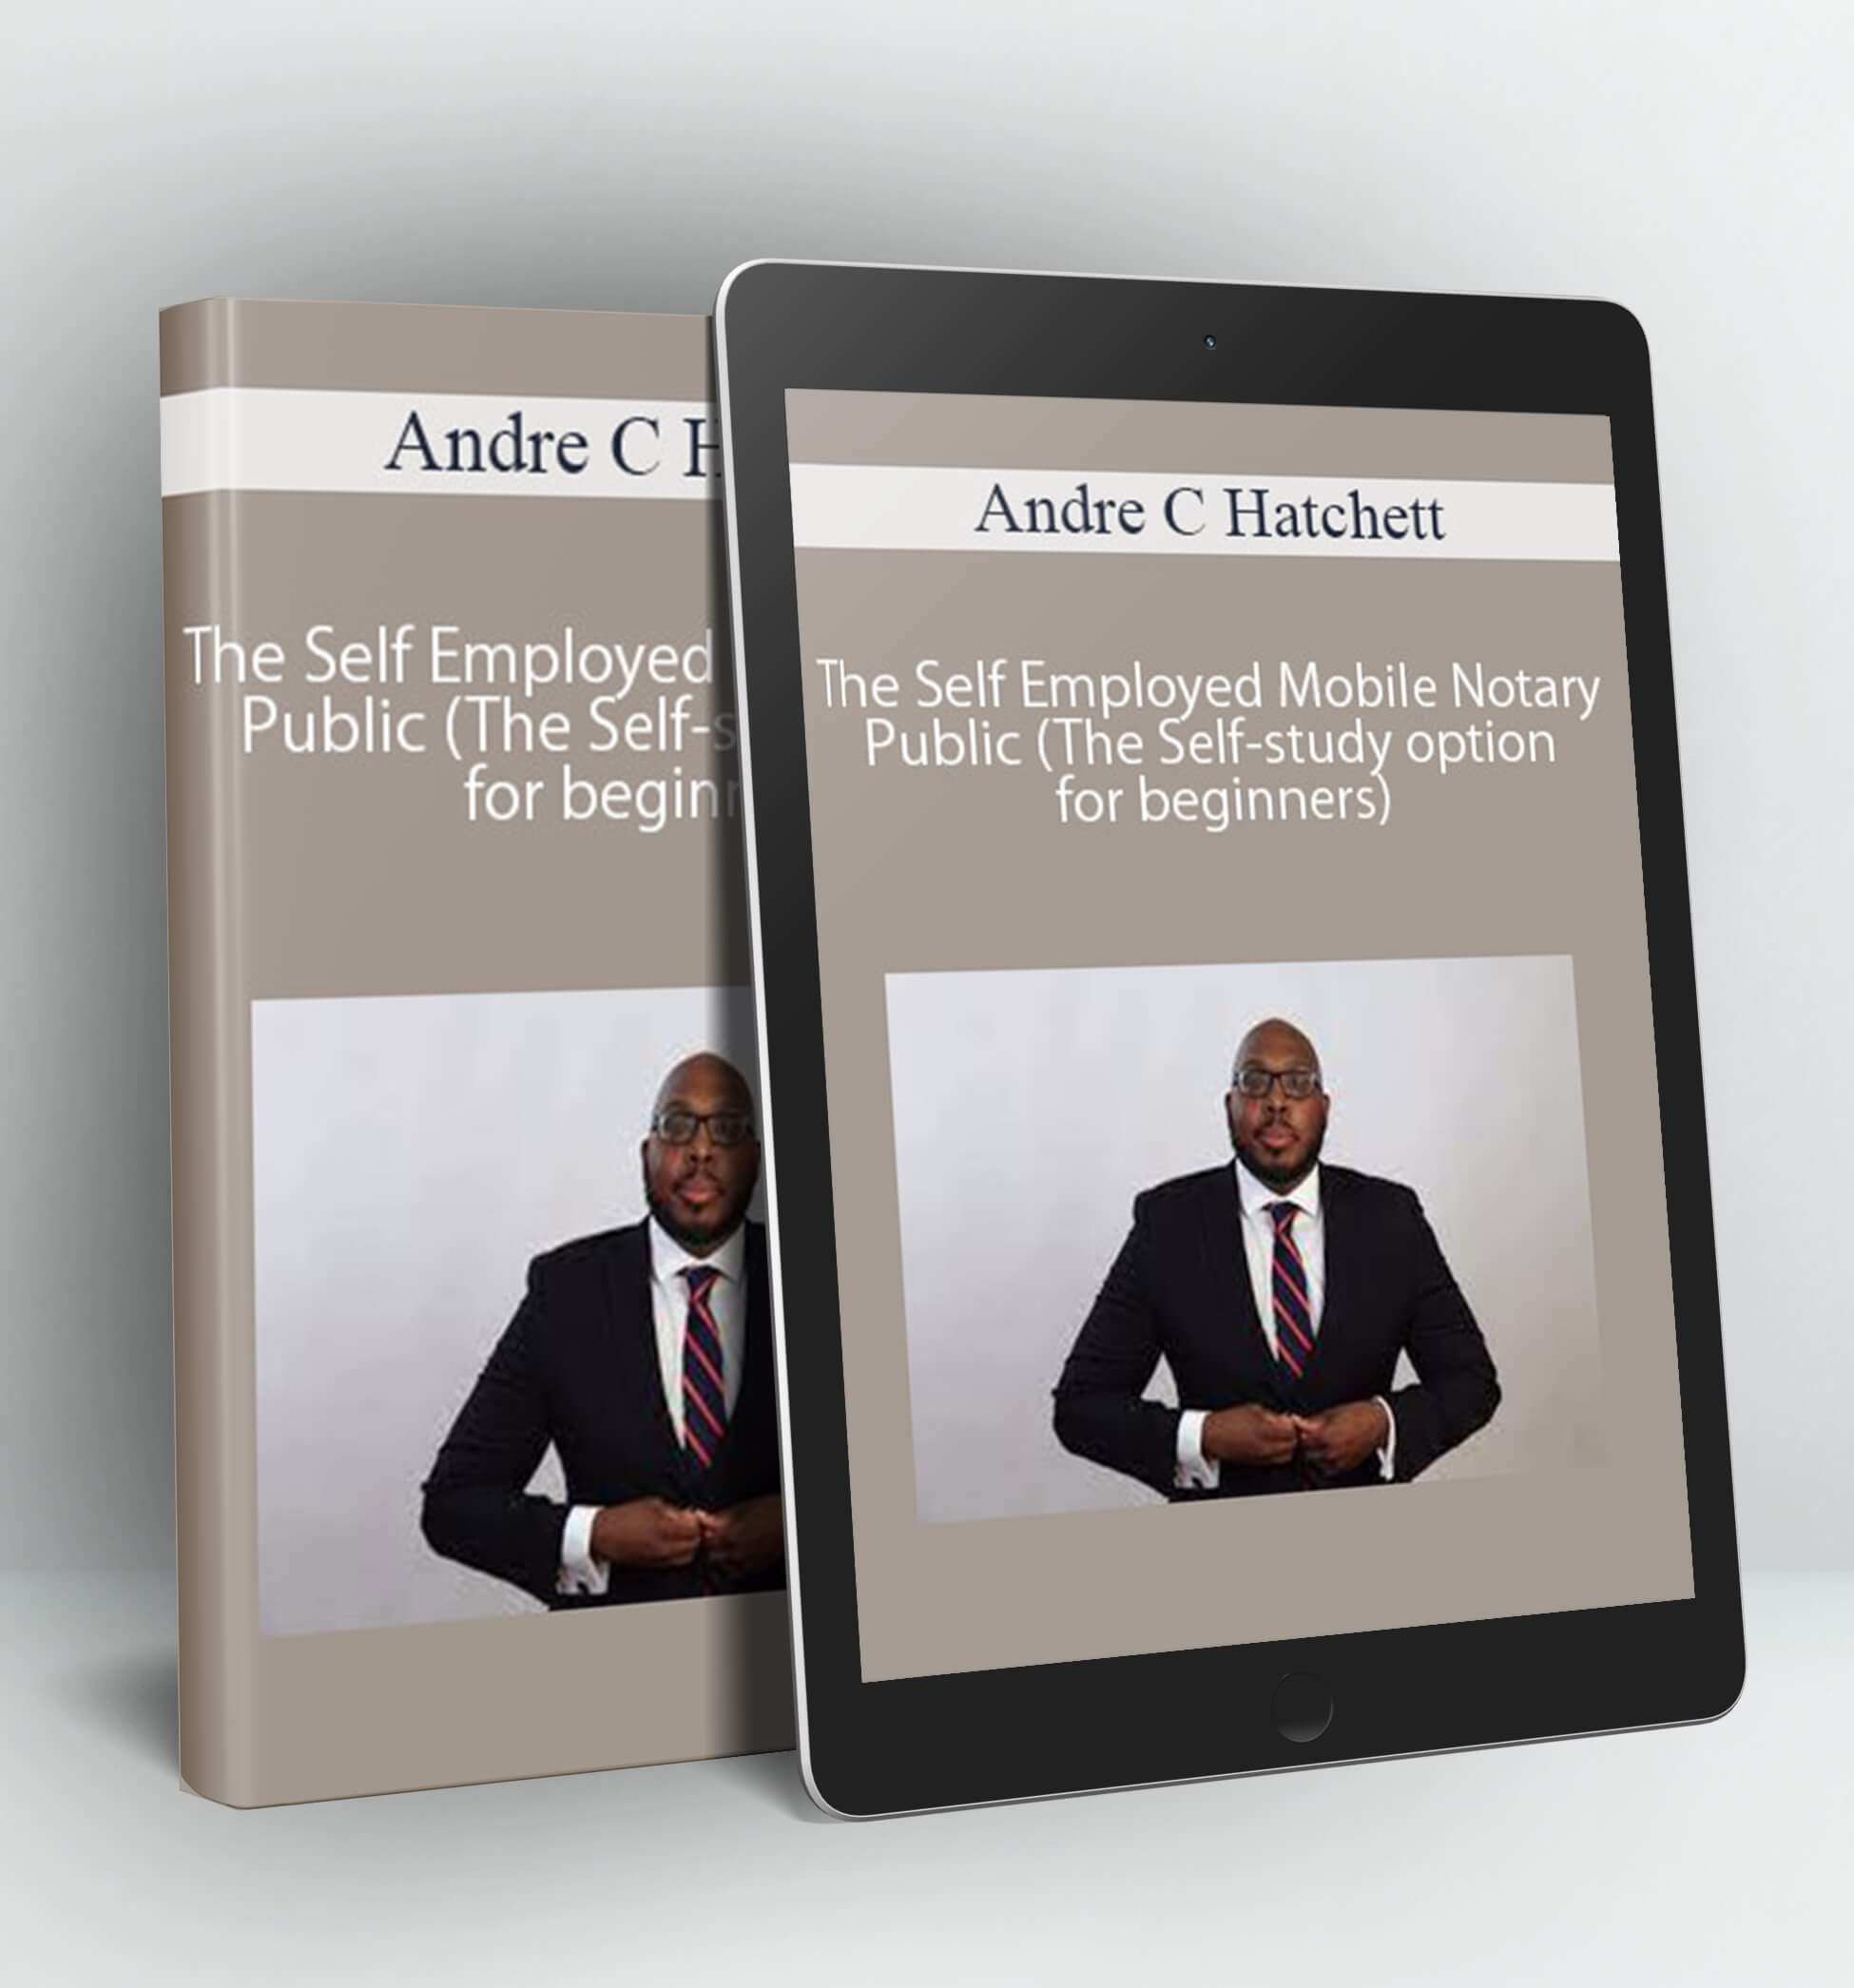 The Self Employed Mobile Notary Public (The Self-study option for beginners) - Andre C Hatchett